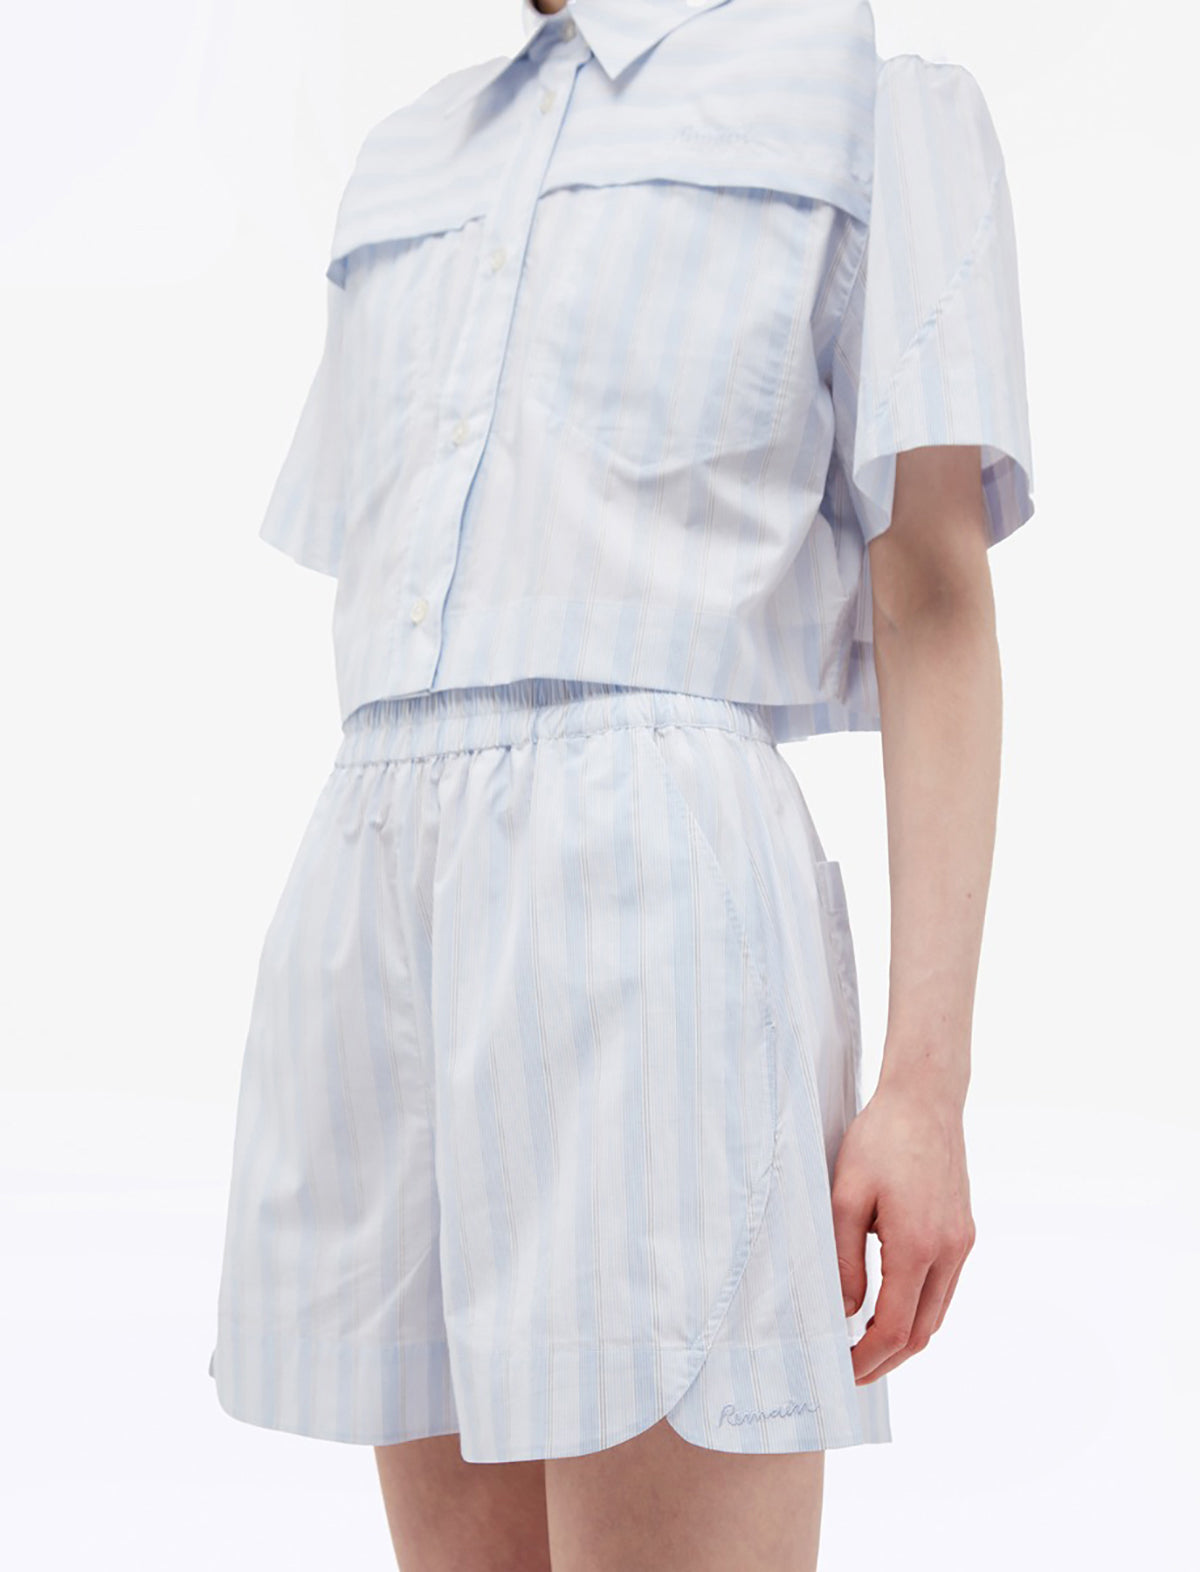 REMAIN Striped Wide Shorts in Grapemist Comb